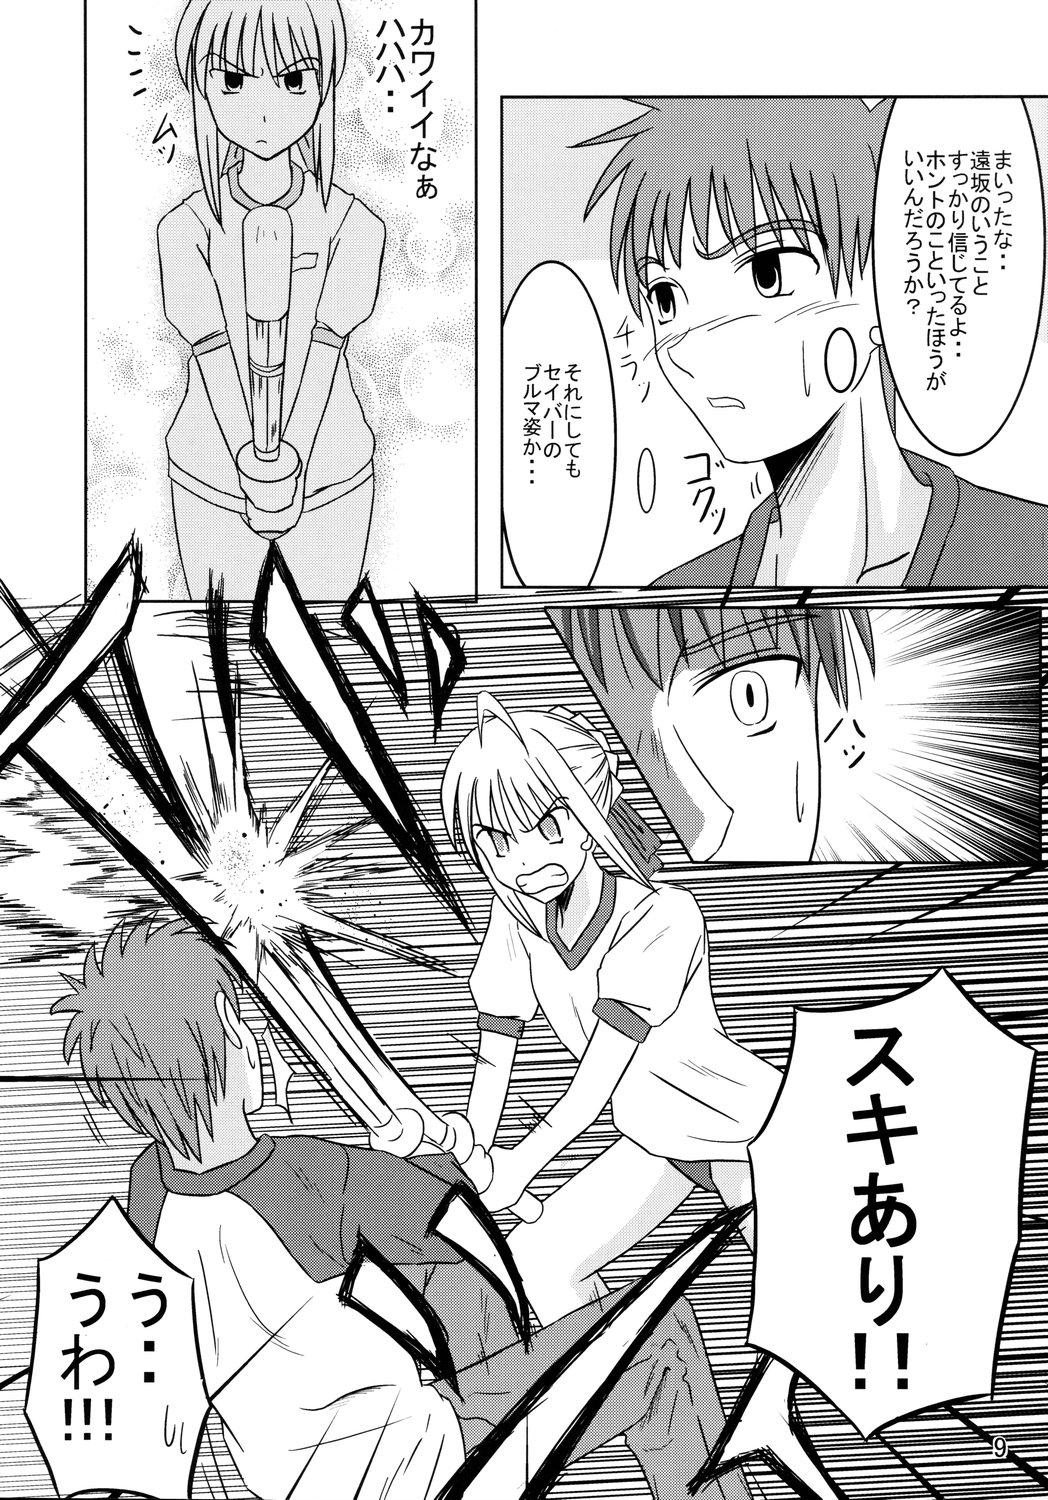 Cream Pie Saber Of Sanity - Fate stay night Lesbians - Page 8